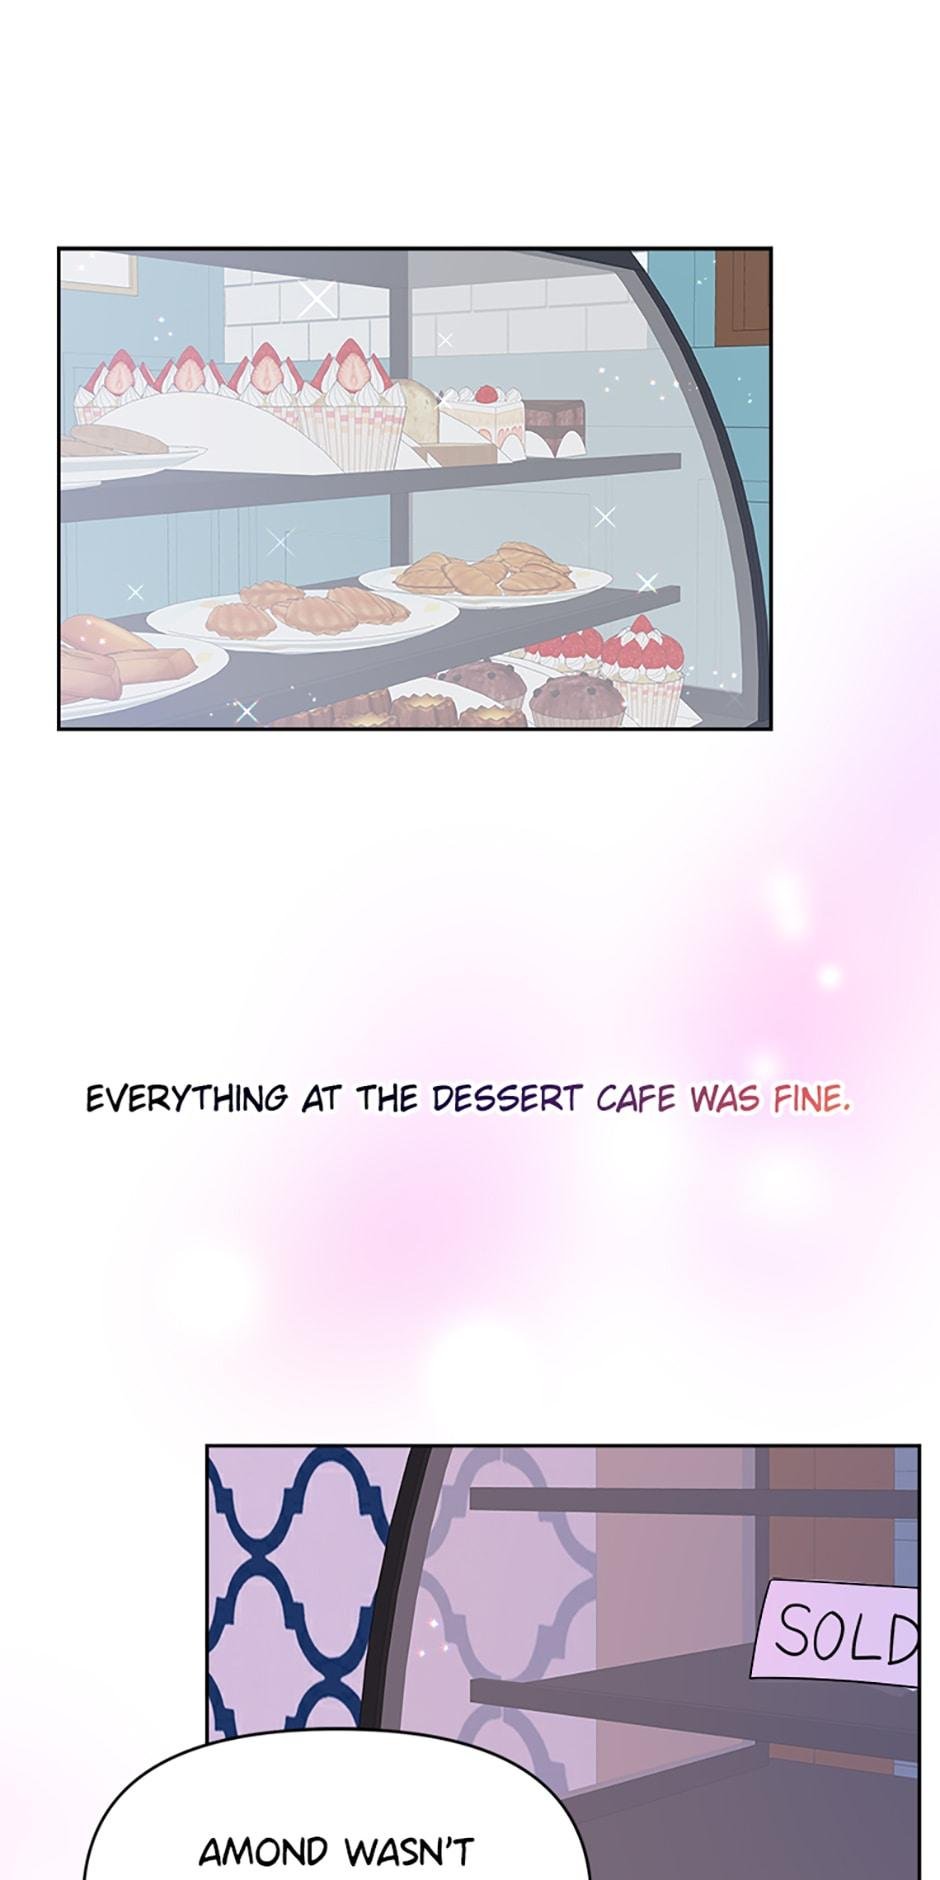 She came back and opened a dessert shop chapter 22